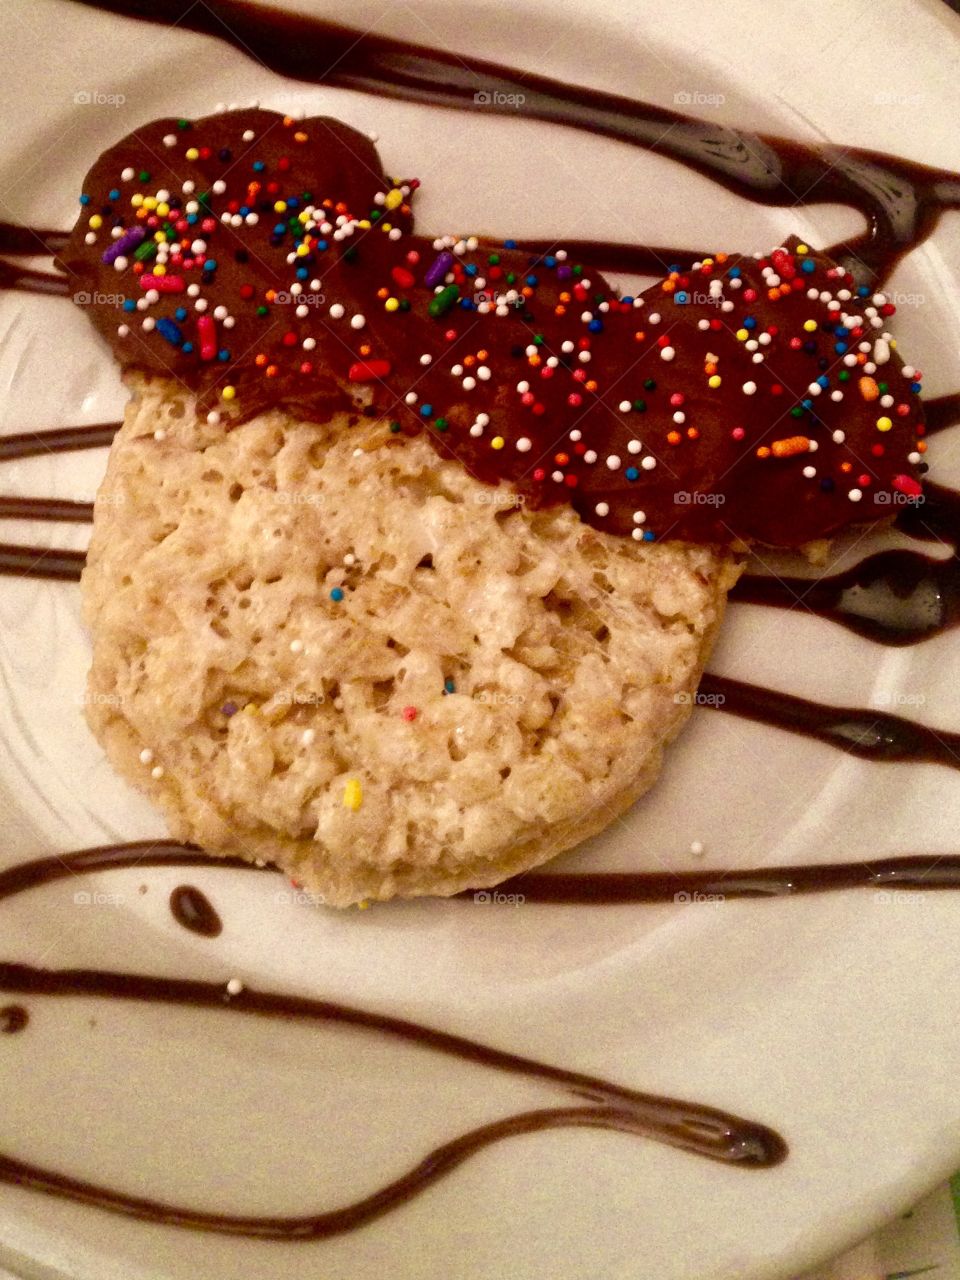 A homemade Rice Krispy Treat in the shape of Mickey Mouse and dipped in chocolate with rainbow sprinkles 